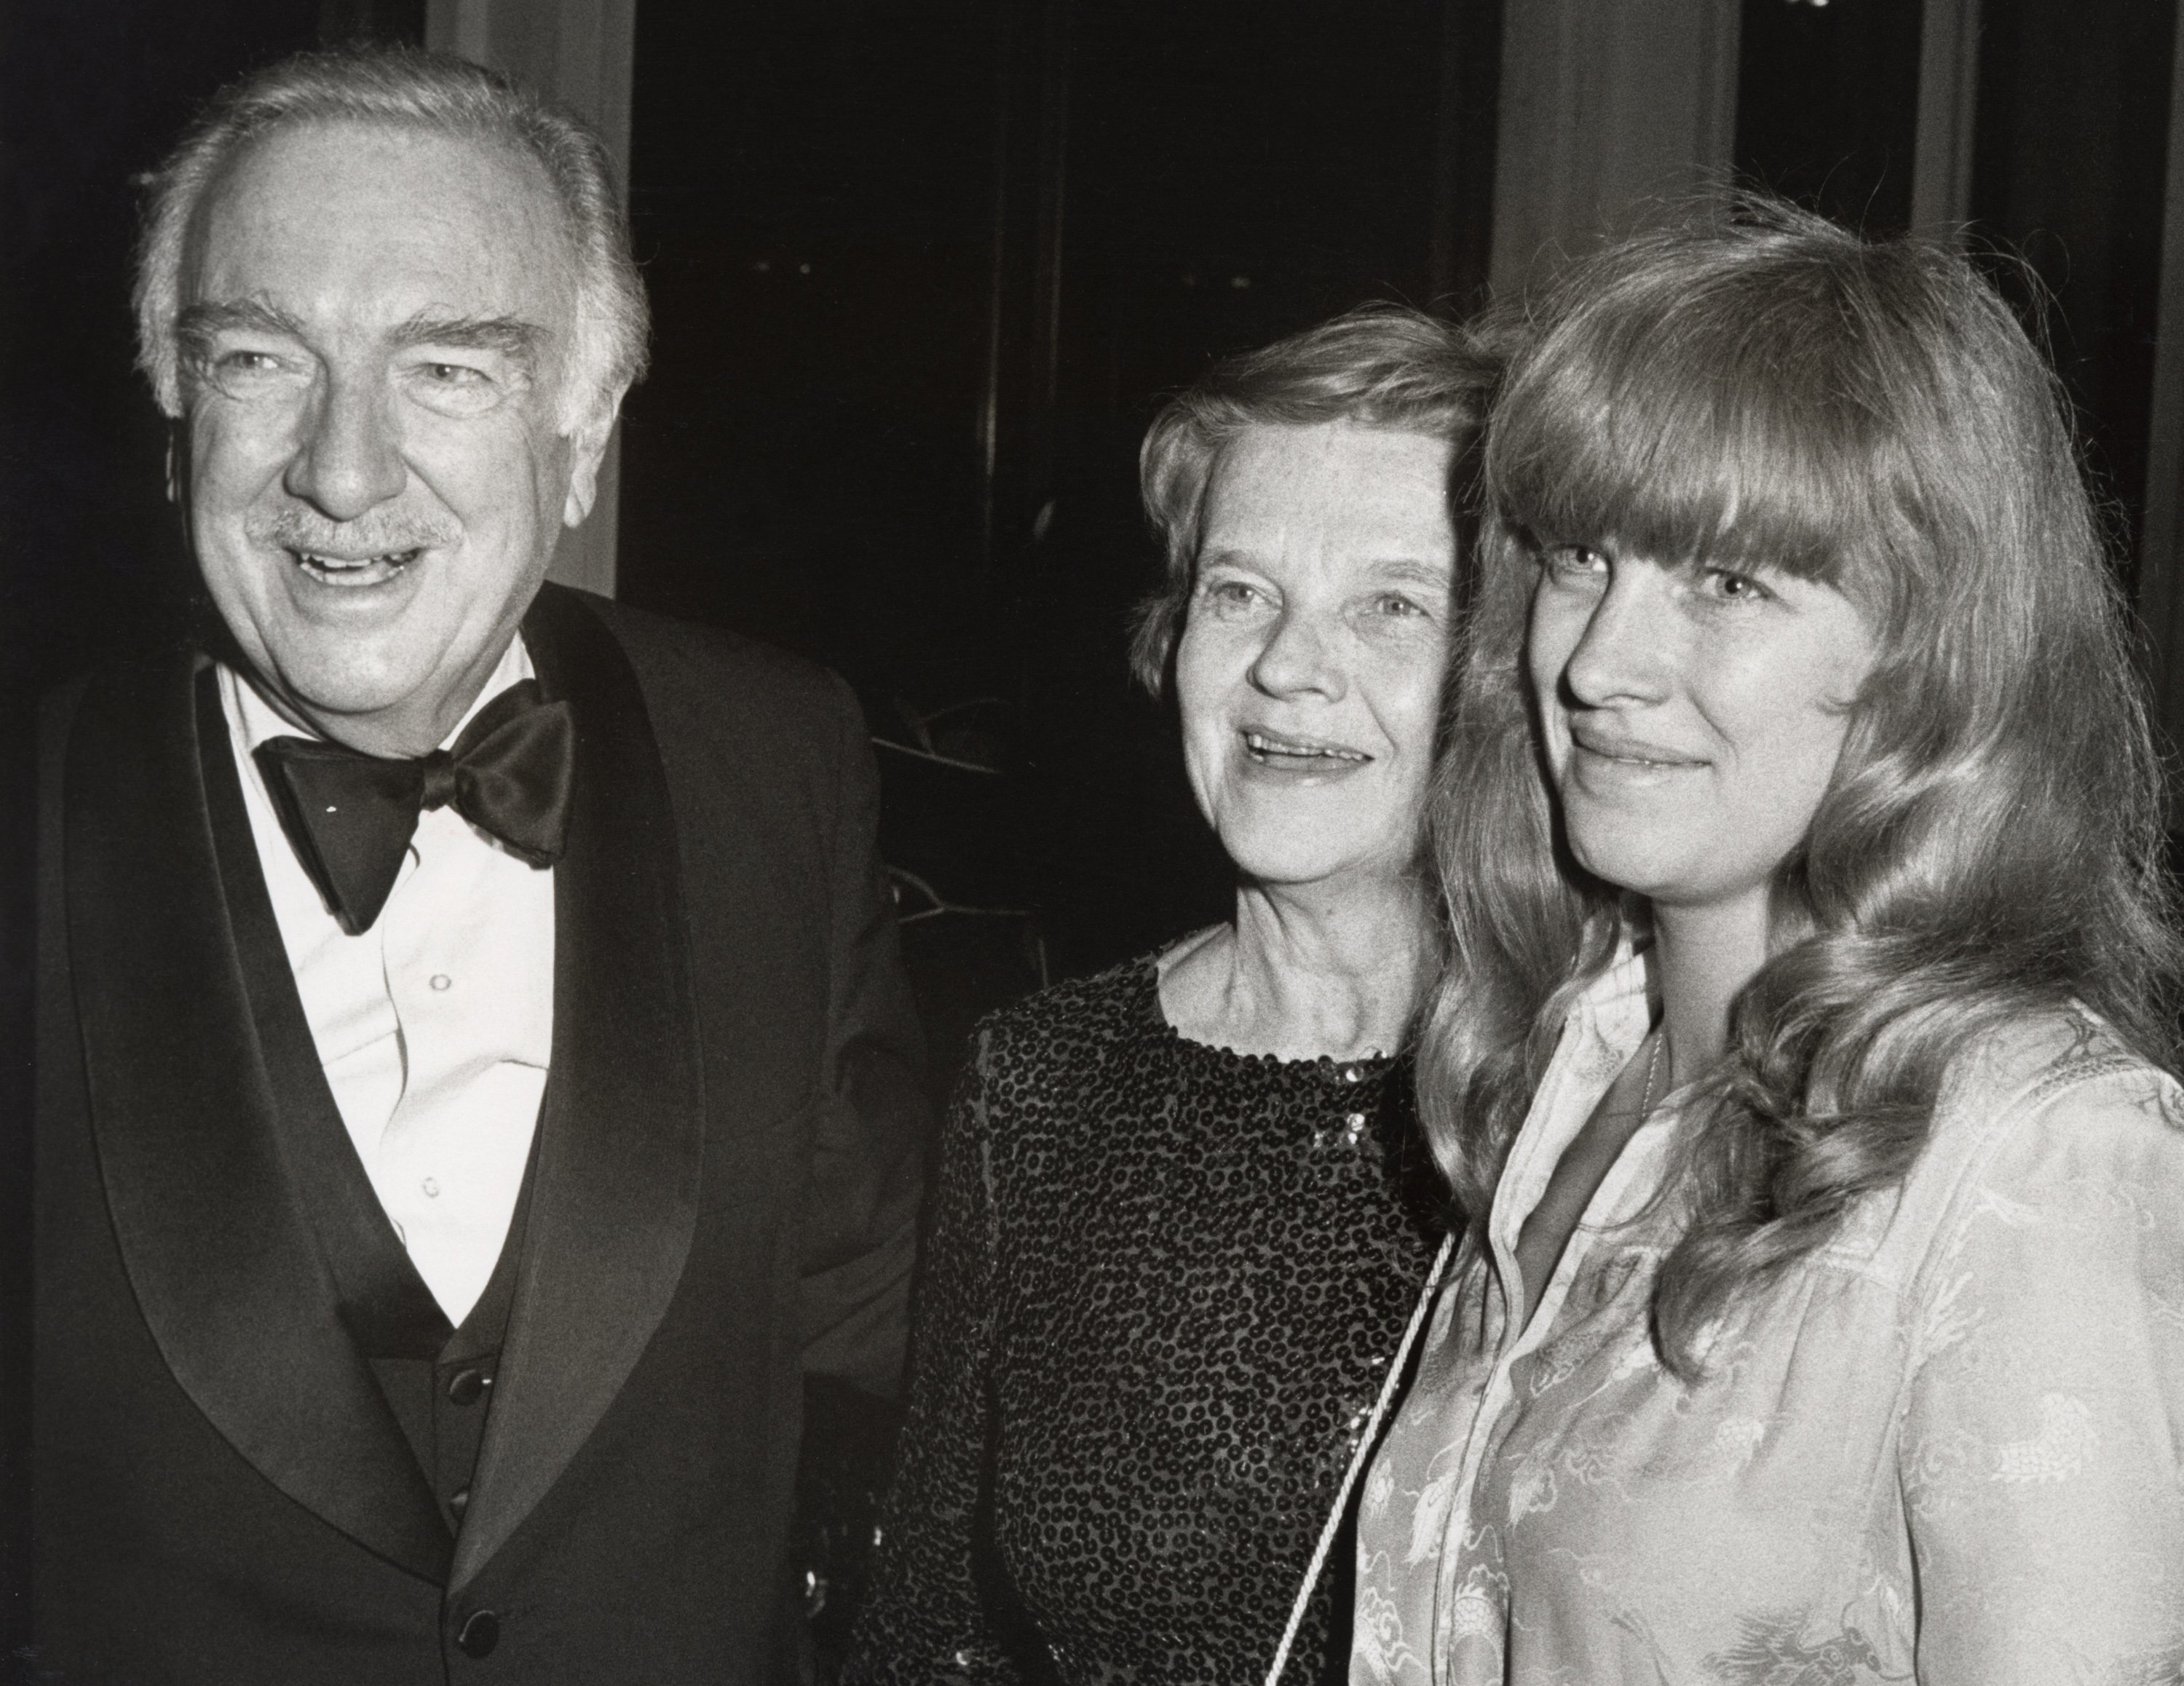 Walter Cronkite, Betsy Cronkite, and daughter during Presidential Reception For The 1980 Kennedy Center Honorees at White House in Washington, D.C., United States. | Source: Getty Images